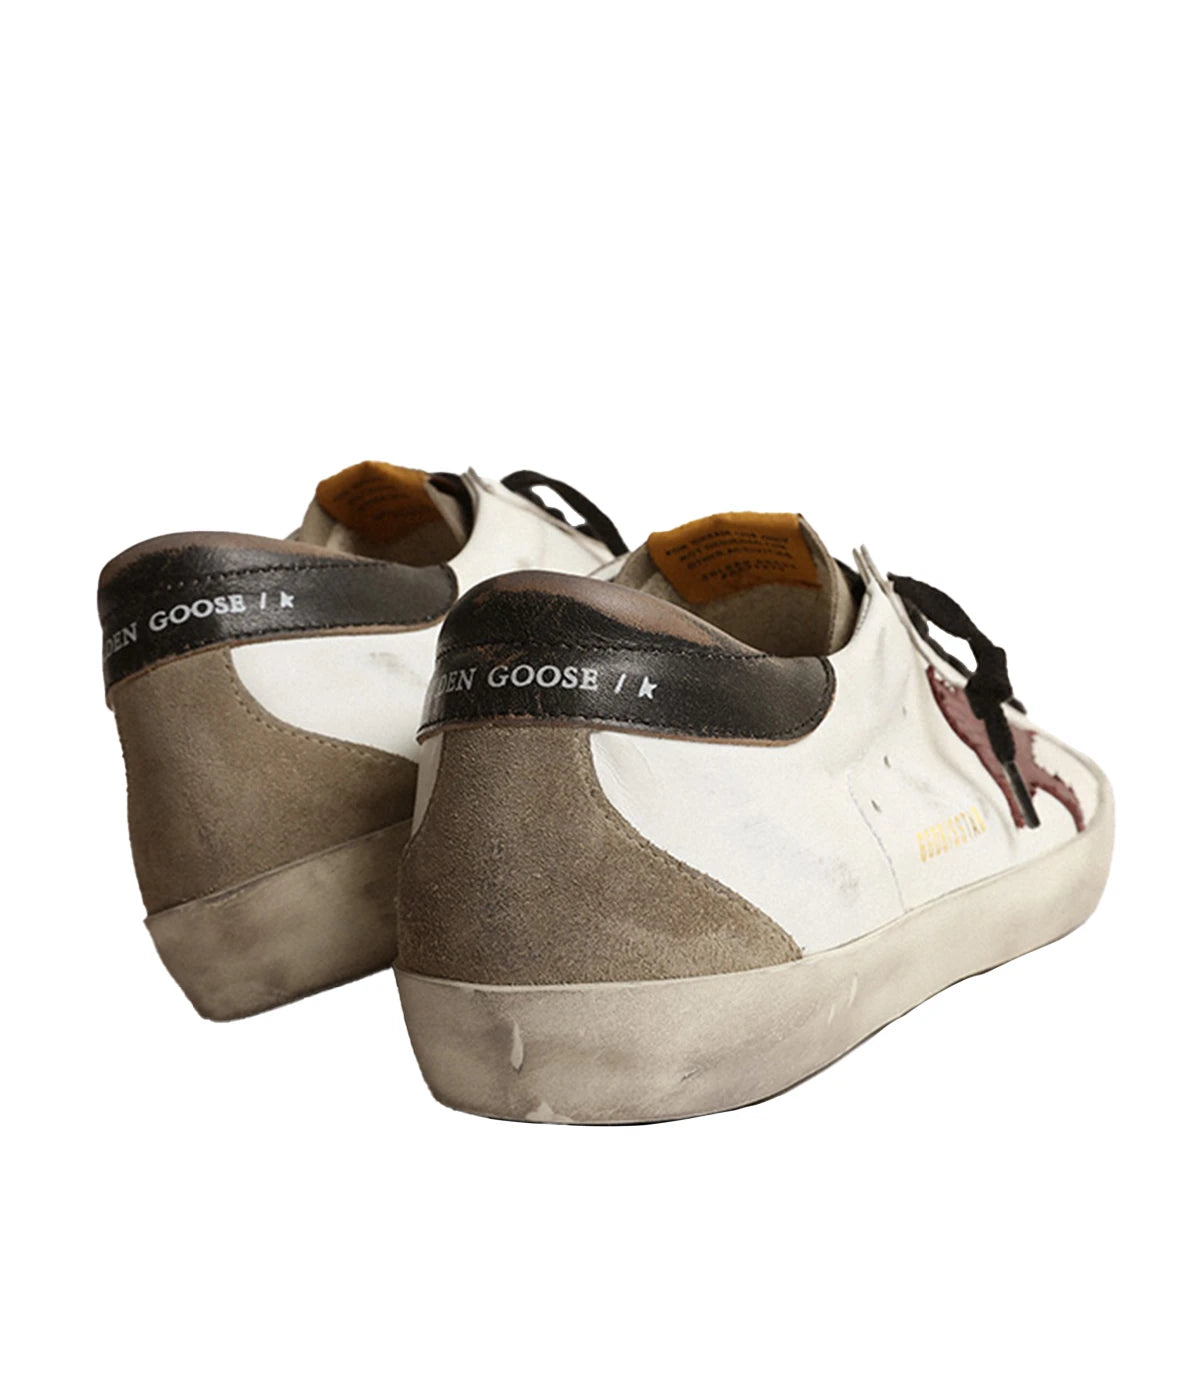 Super-Star Leather Upper Suede in White, Taupe, Bordeaux & Black